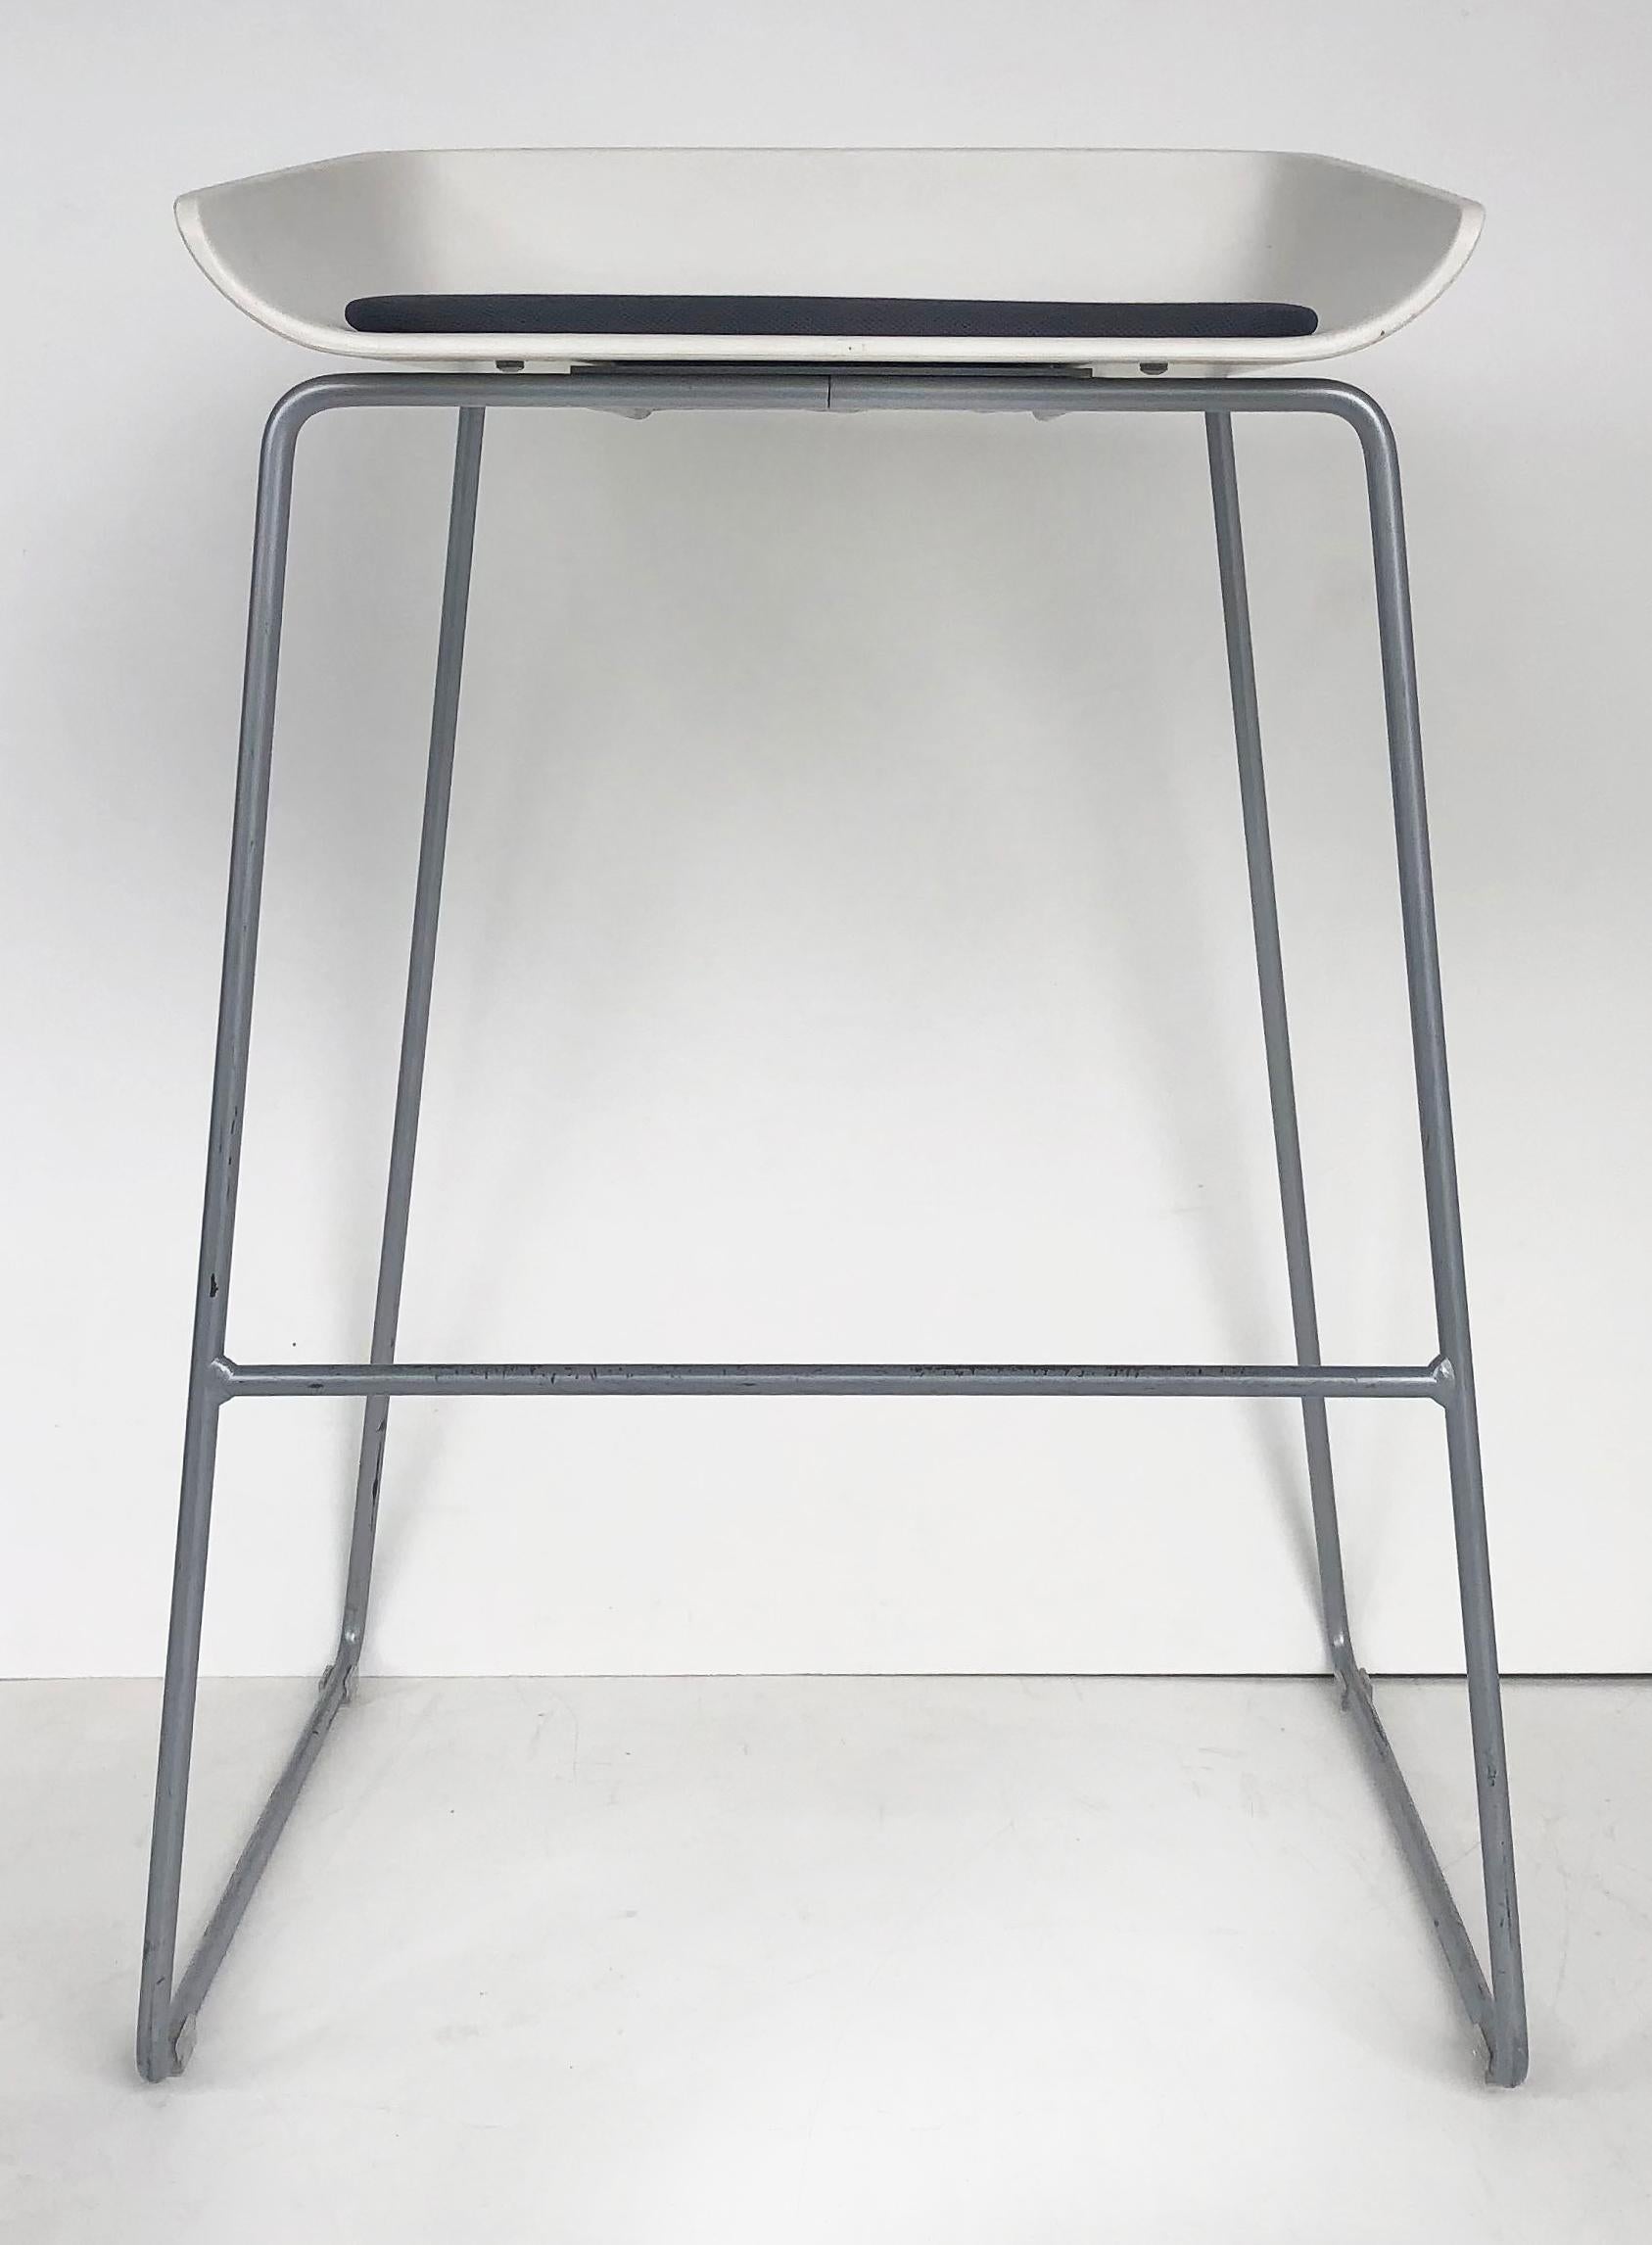 Turnstone scoop bar stools for Steelcase Furniture, set of four

Offered for sale is a set of four Turnstone 